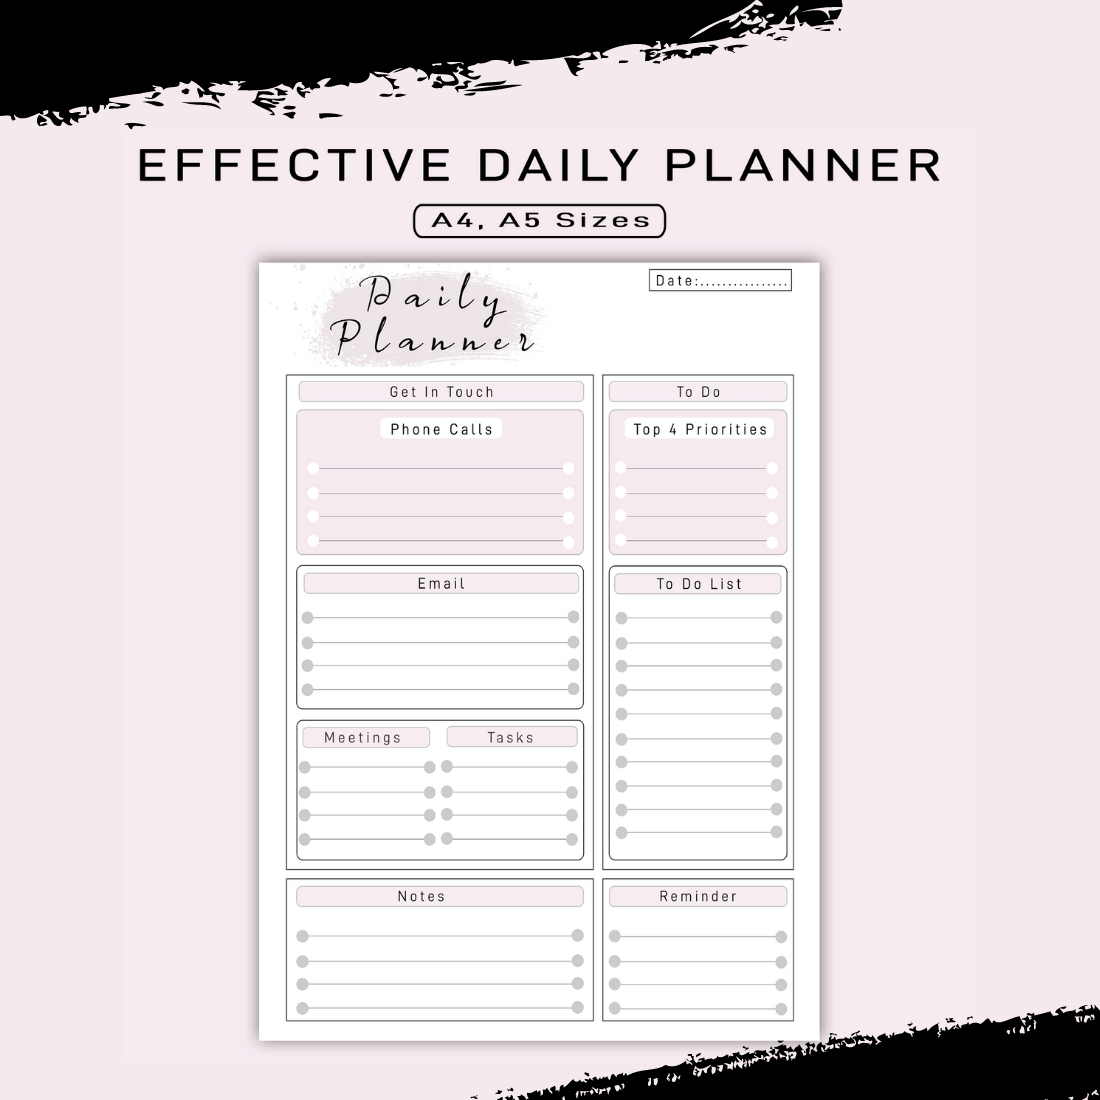 This is an effective daily planner for your daily life.